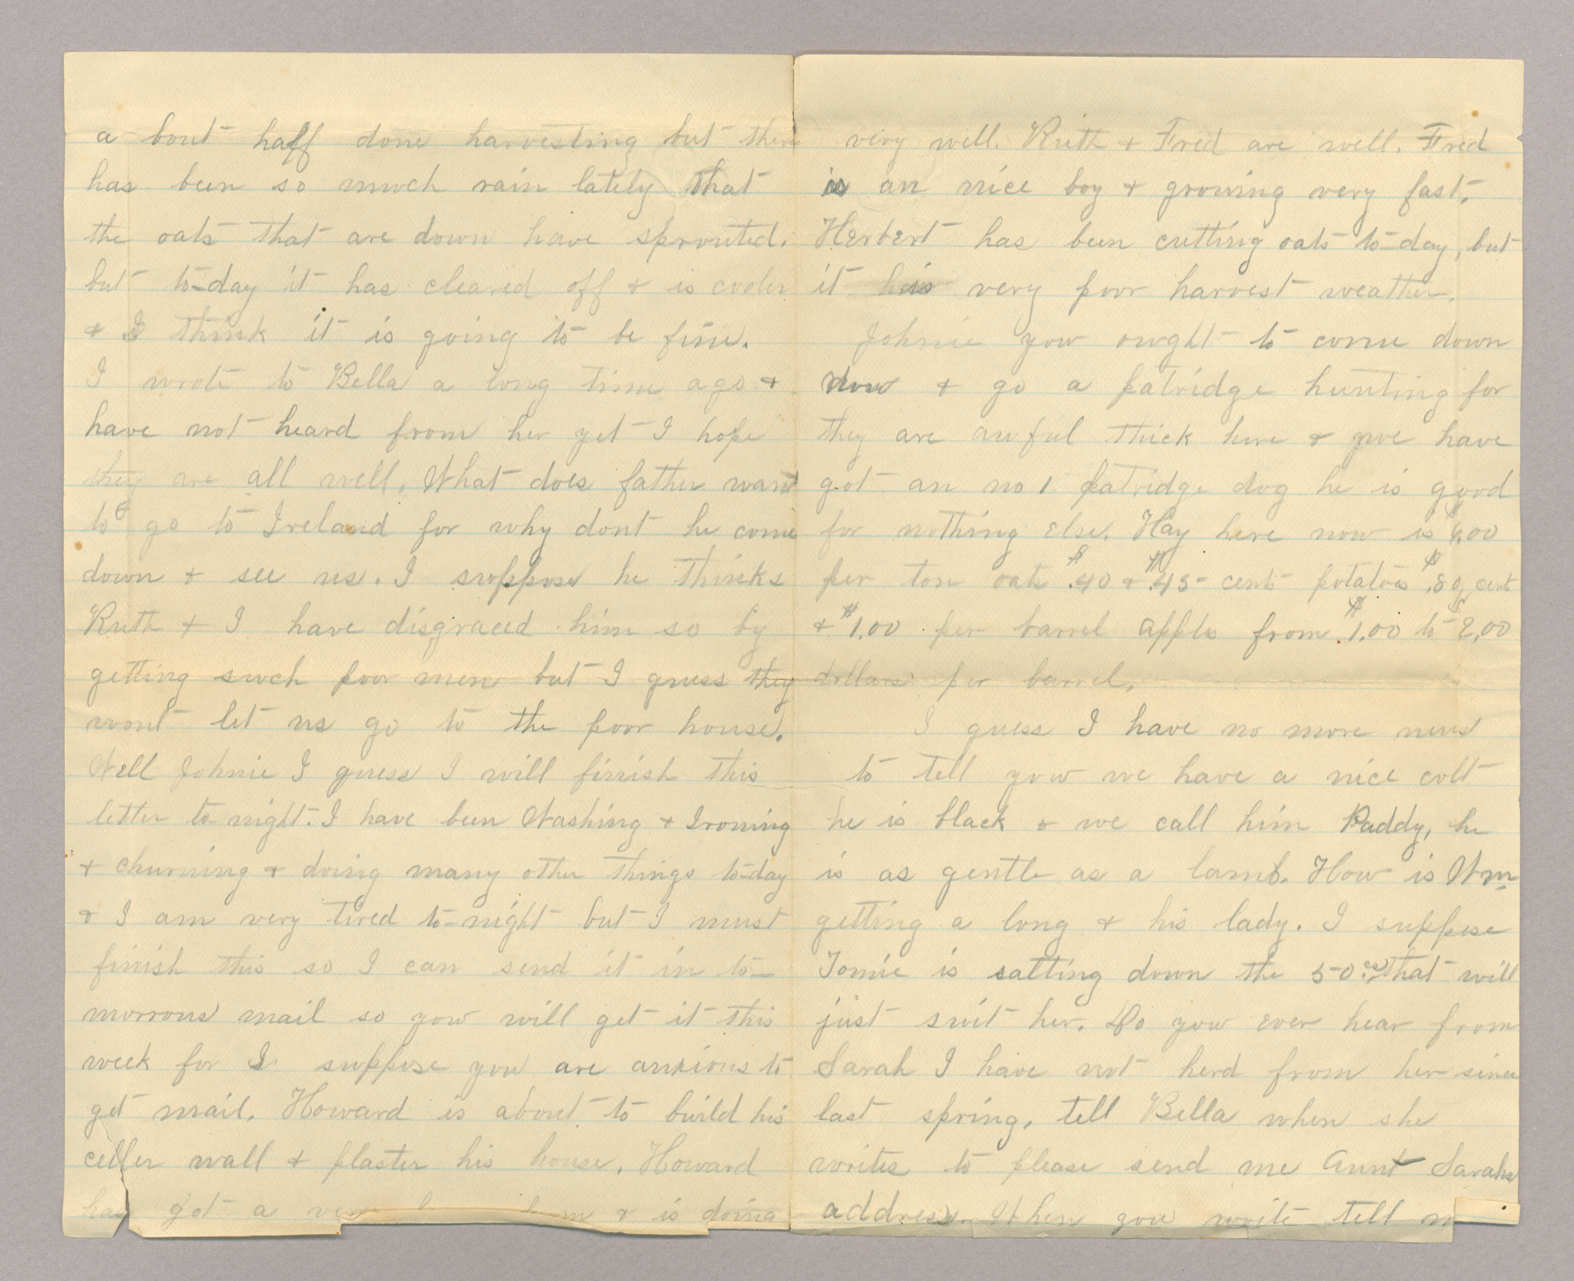 Letter. "[Y]our ever true Sister Jane" [Jane Brownlee ?], South Newbridge, New Brunswick, to Mr. John E. Brownlee [Jr.], Costello, Pennsylvania, Pages 2-3